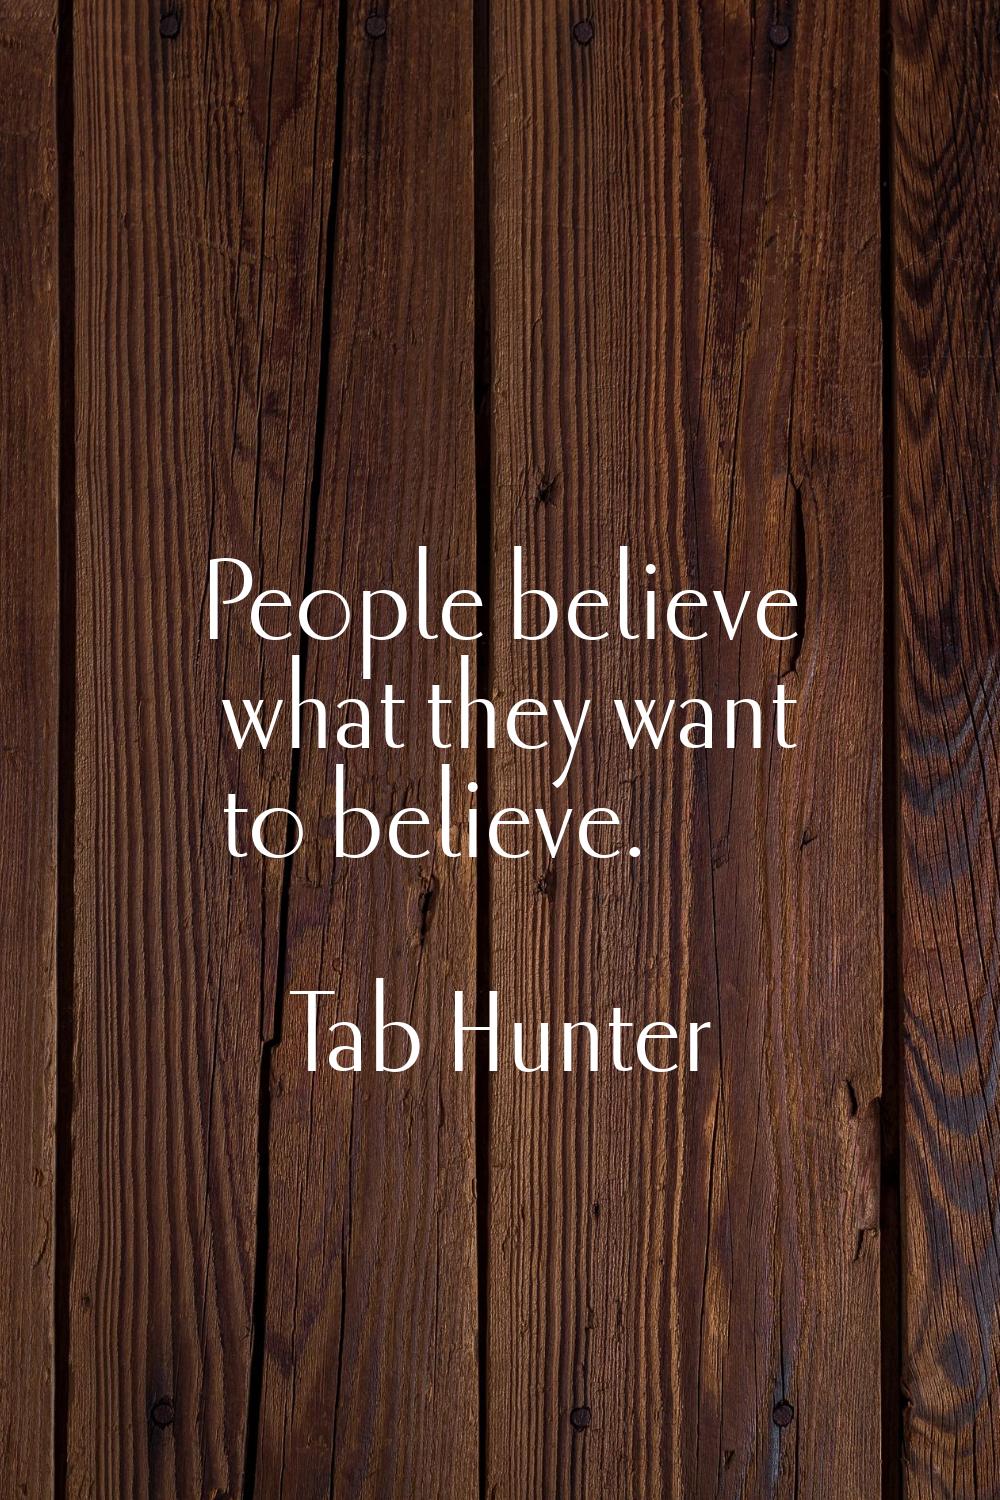 People believe what they want to believe.